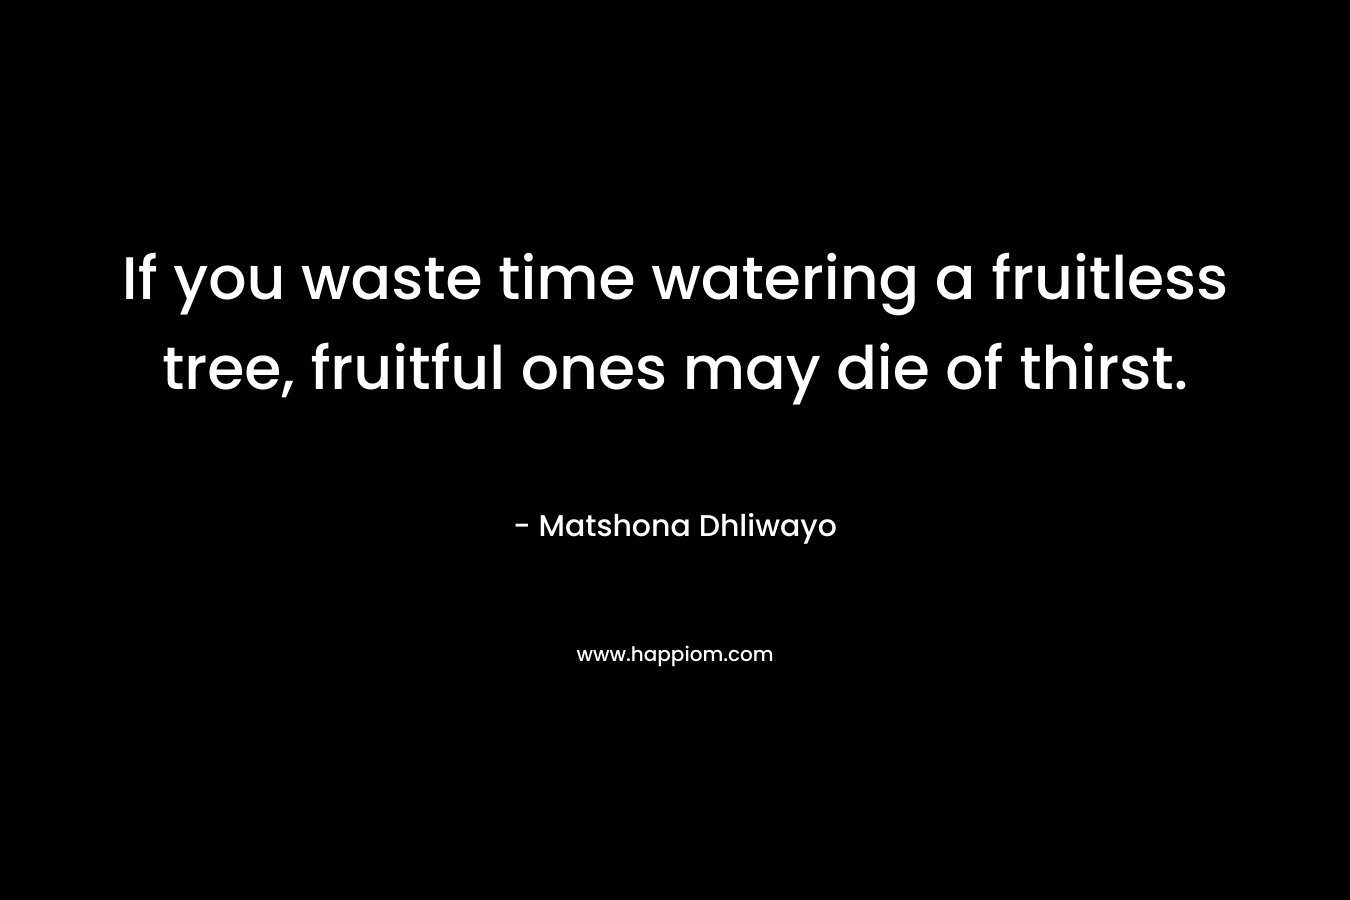 If you waste time watering a fruitless tree, fruitful ones may die of thirst.